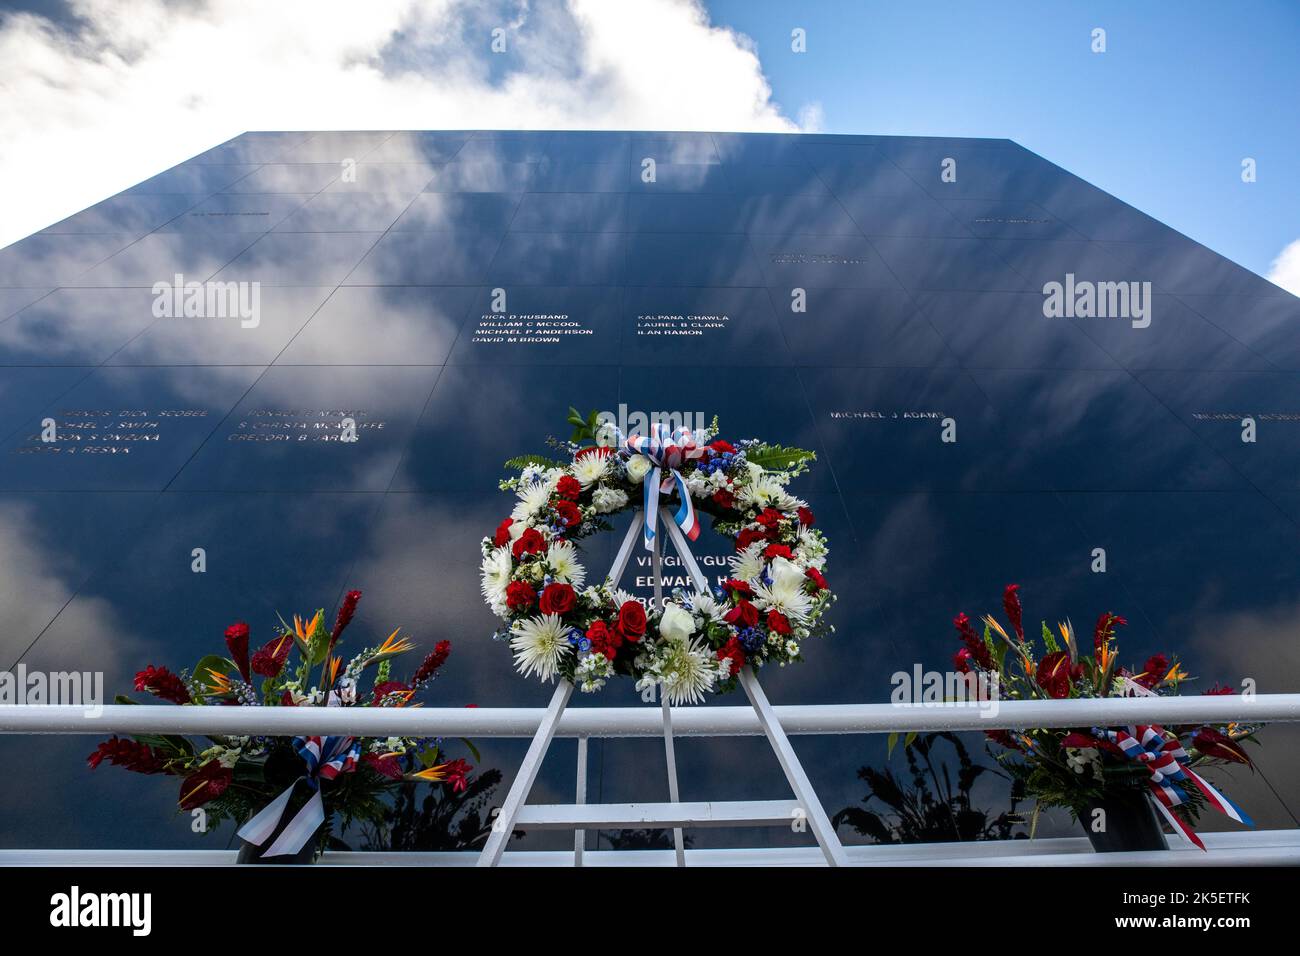 A wreath is placed in front of the Space Mirror Memorial at NASA’s Kennedy Space Center Visitor Complex during the NASA Day of Remembrance on Jan. 27, 2022. Kennedy Space Center in Florida paid tribute to the crews of Apollo 1 and space shuttles Challenger and Columbia, as well as other astronauts who lost their lives while furthering the cause of exploration and discovery. Stock Photo